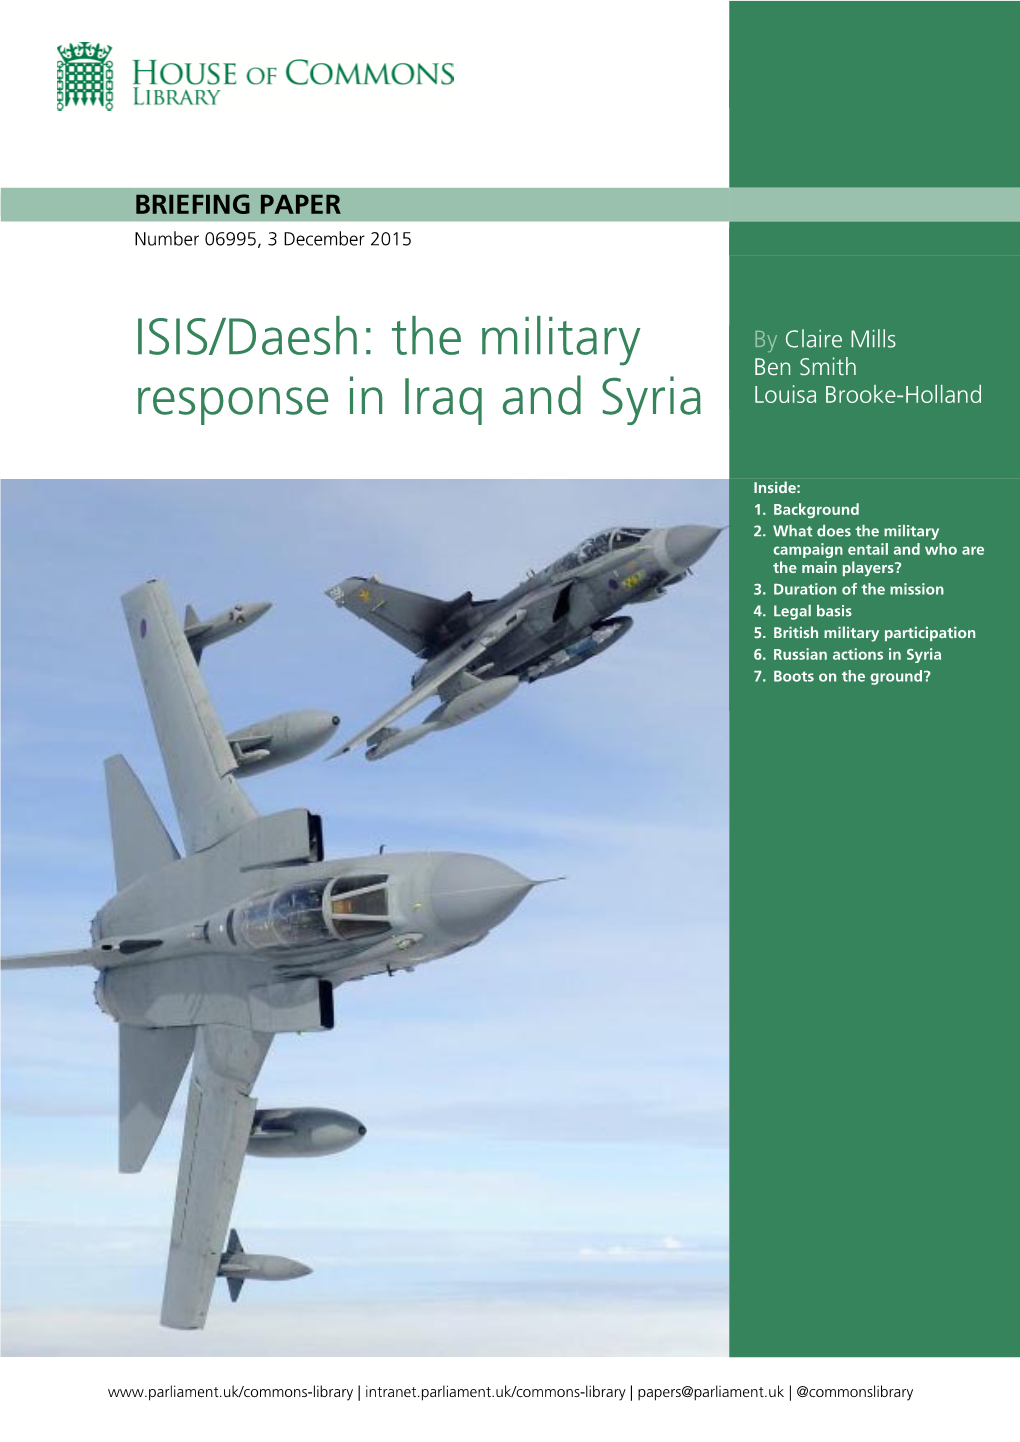 ISIS/Daesh: the Military Response in Iraq and Syria